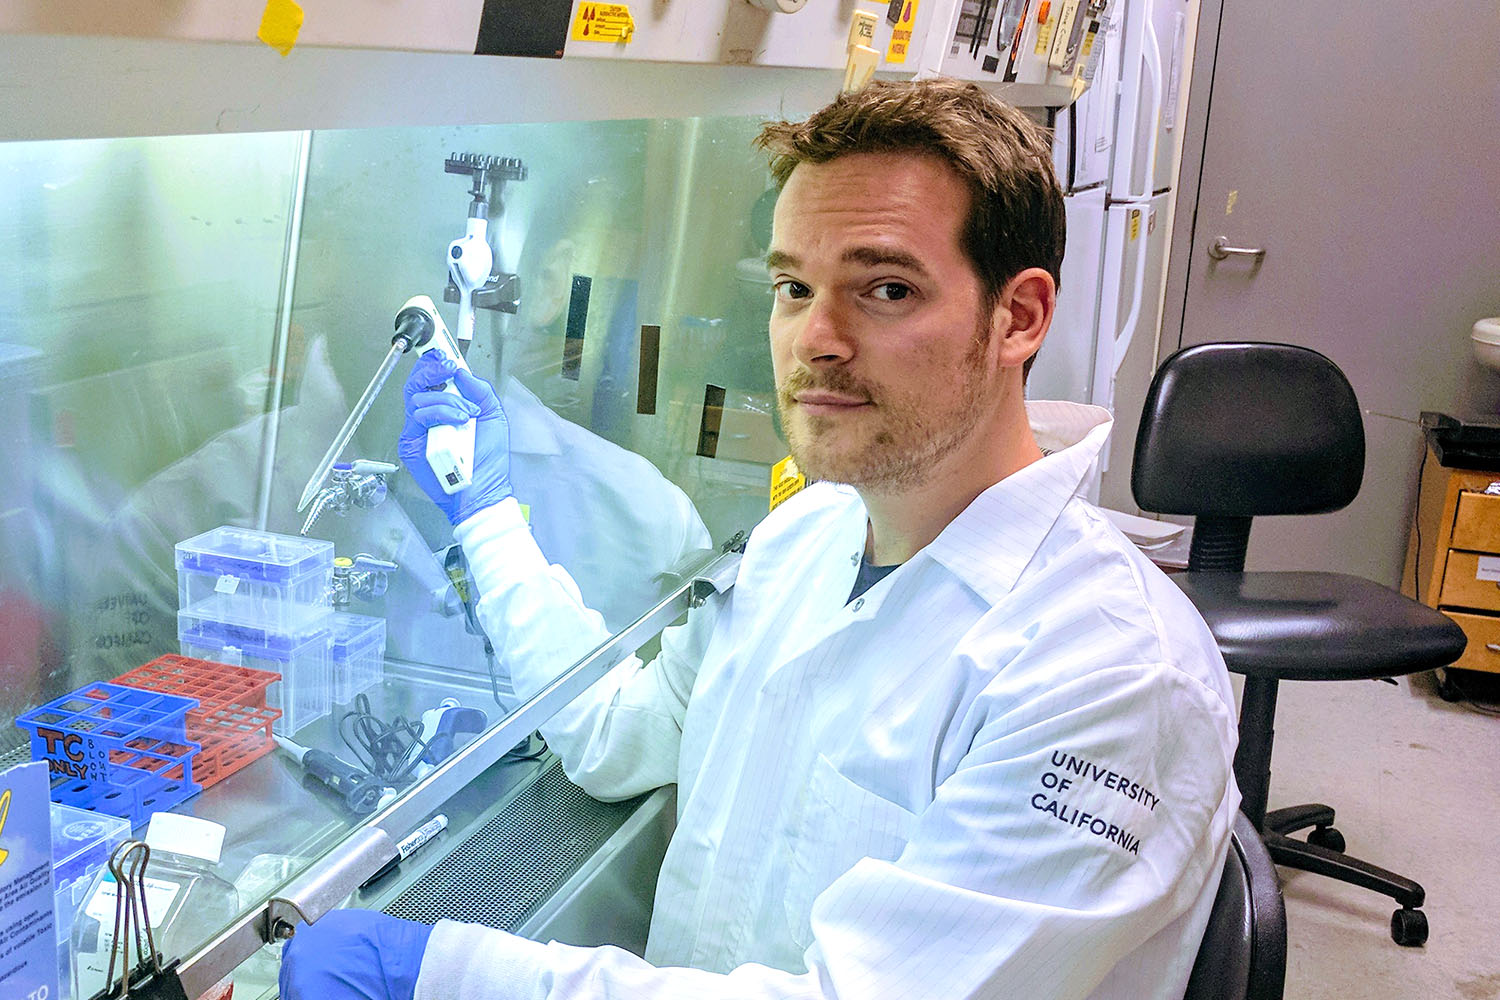 Rutger D. Luteijn, Ph.D., a CRI Postdoctoral Fellow in the lab of David H. Raulet, Ph.D., at the University of California, Berkeley, is studying how STING-related molecular pathways involved in immune system activation contribute to cell senescence in the context of DNA damage leading to age-related diseases including cancer.